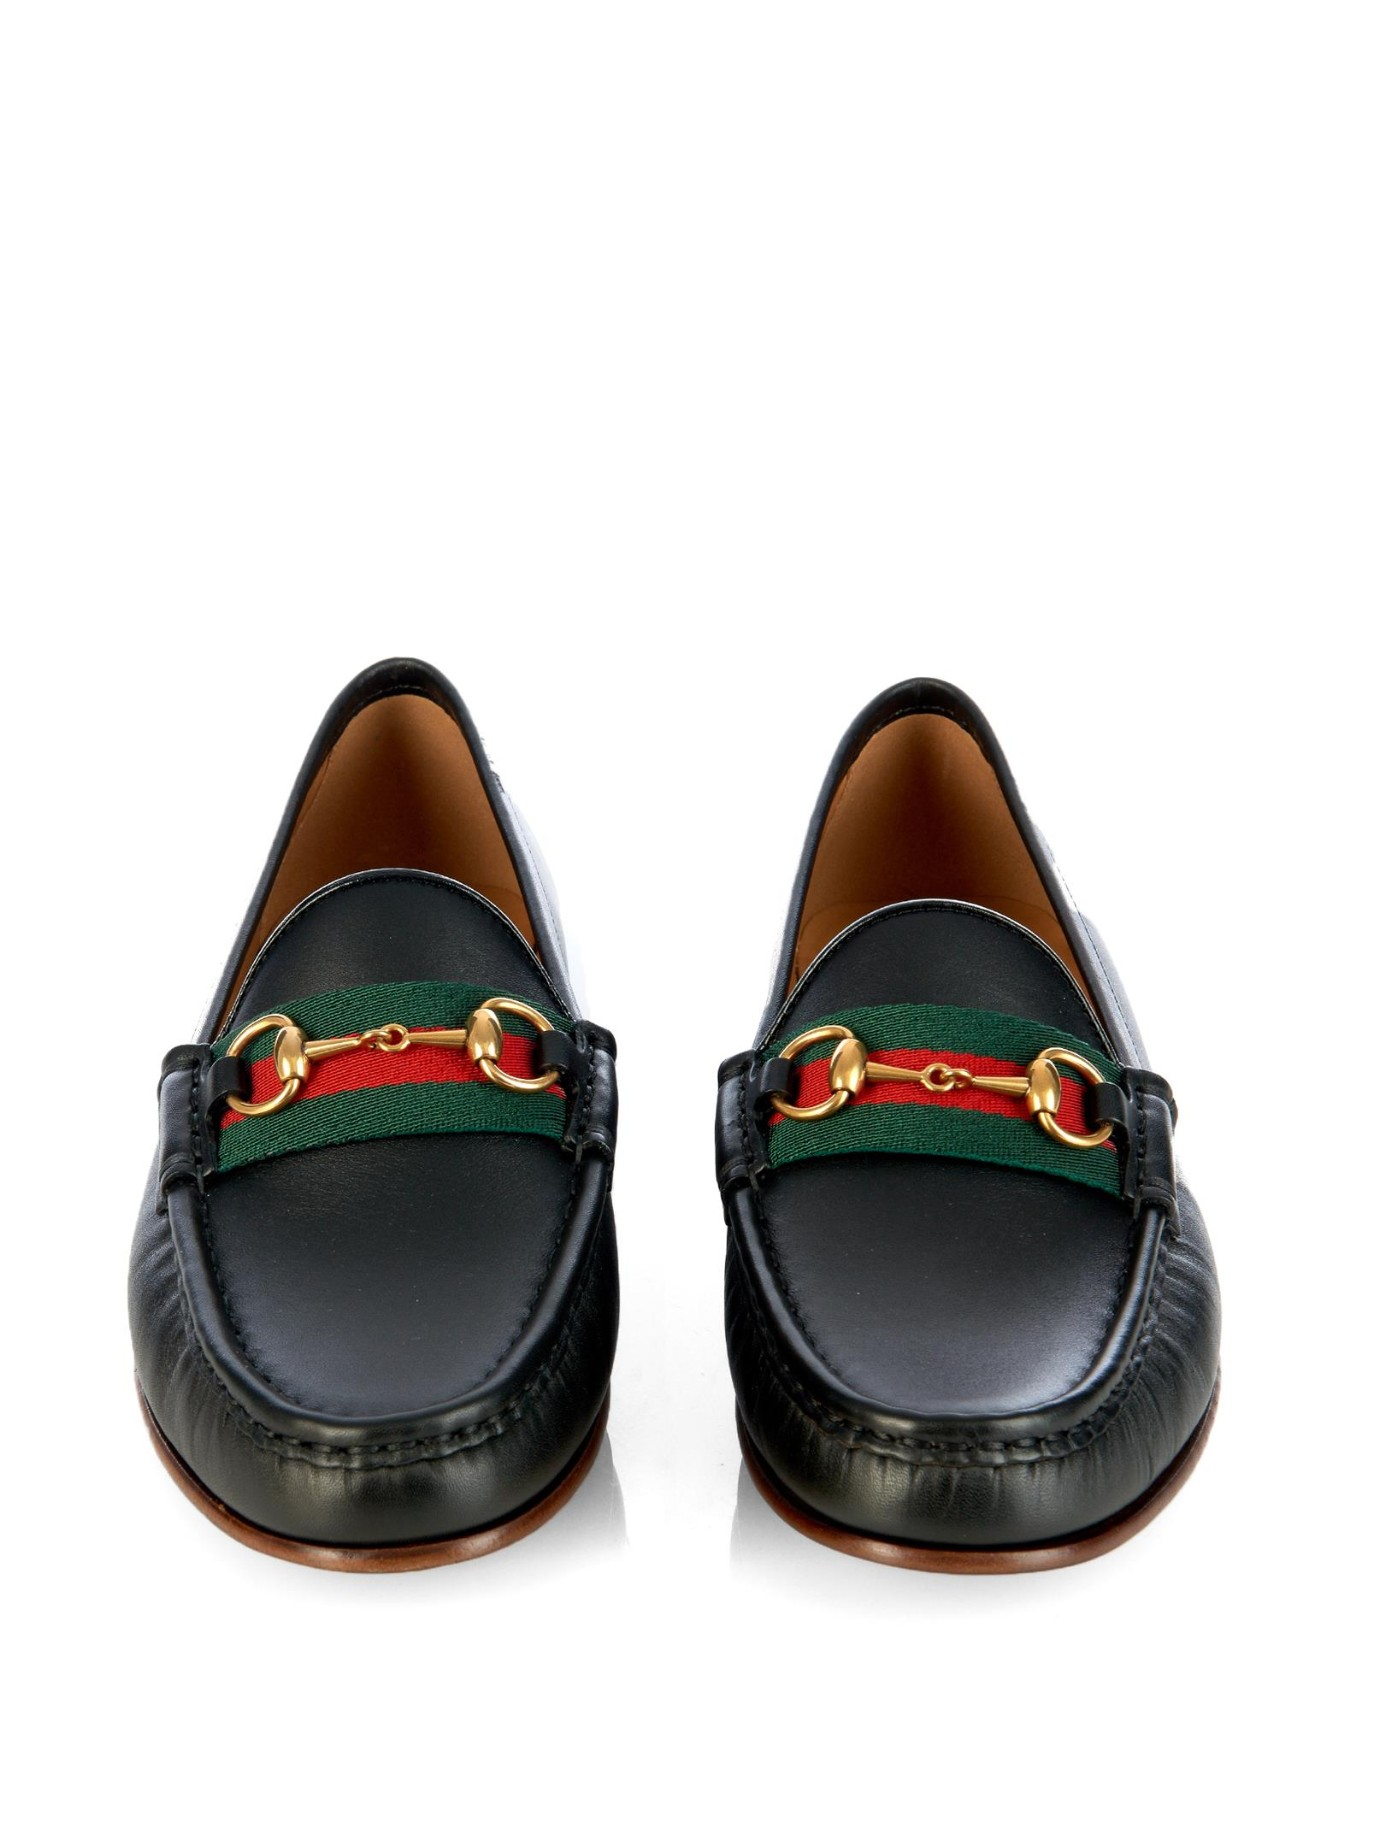 Lyst - Gucci Horsebit And Web Leather Loafers in Black